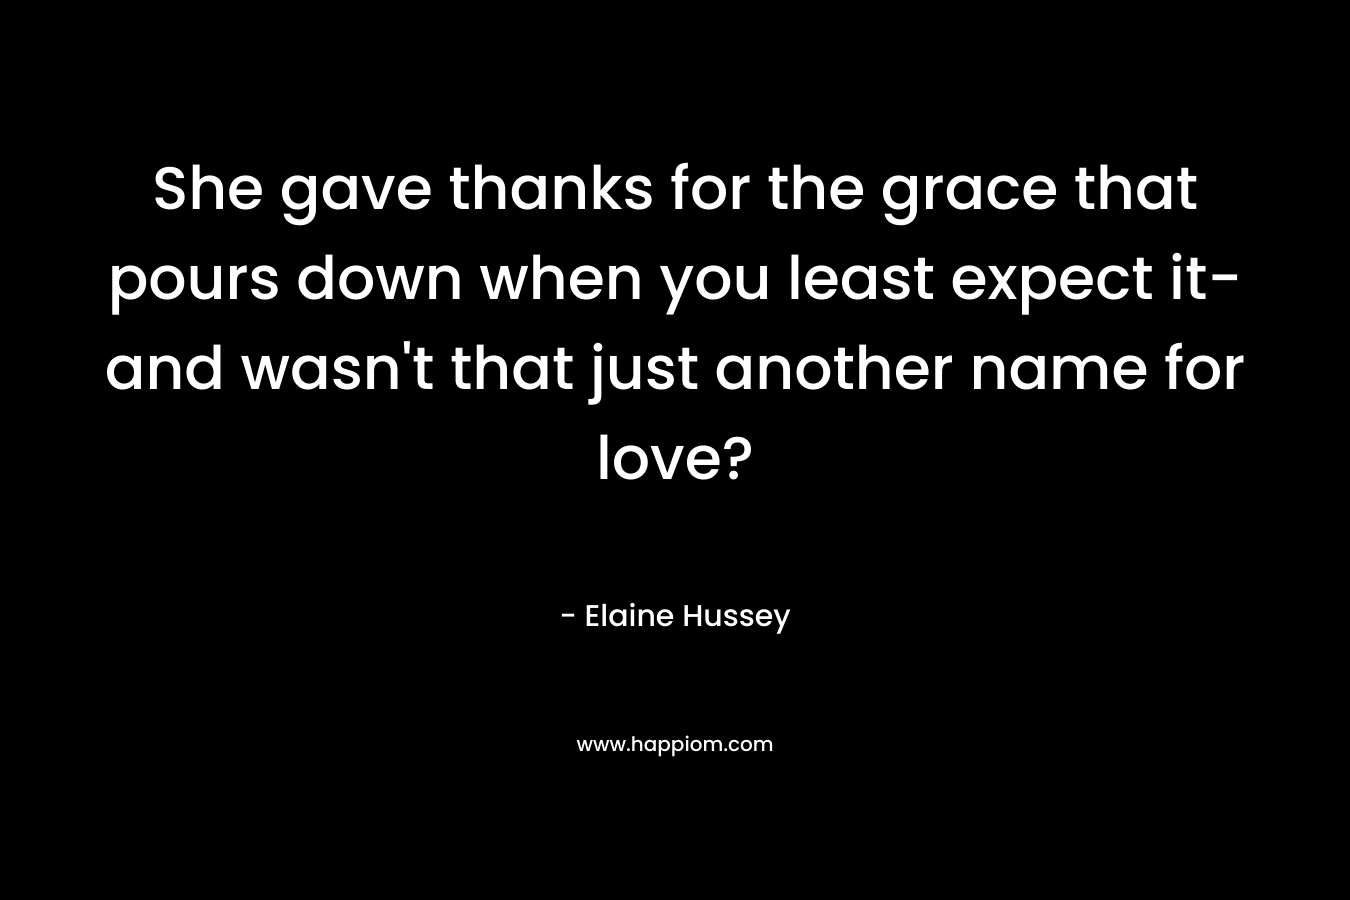 She gave thanks for the grace that pours down when you least expect it-and wasn’t that just another name for love? – Elaine Hussey